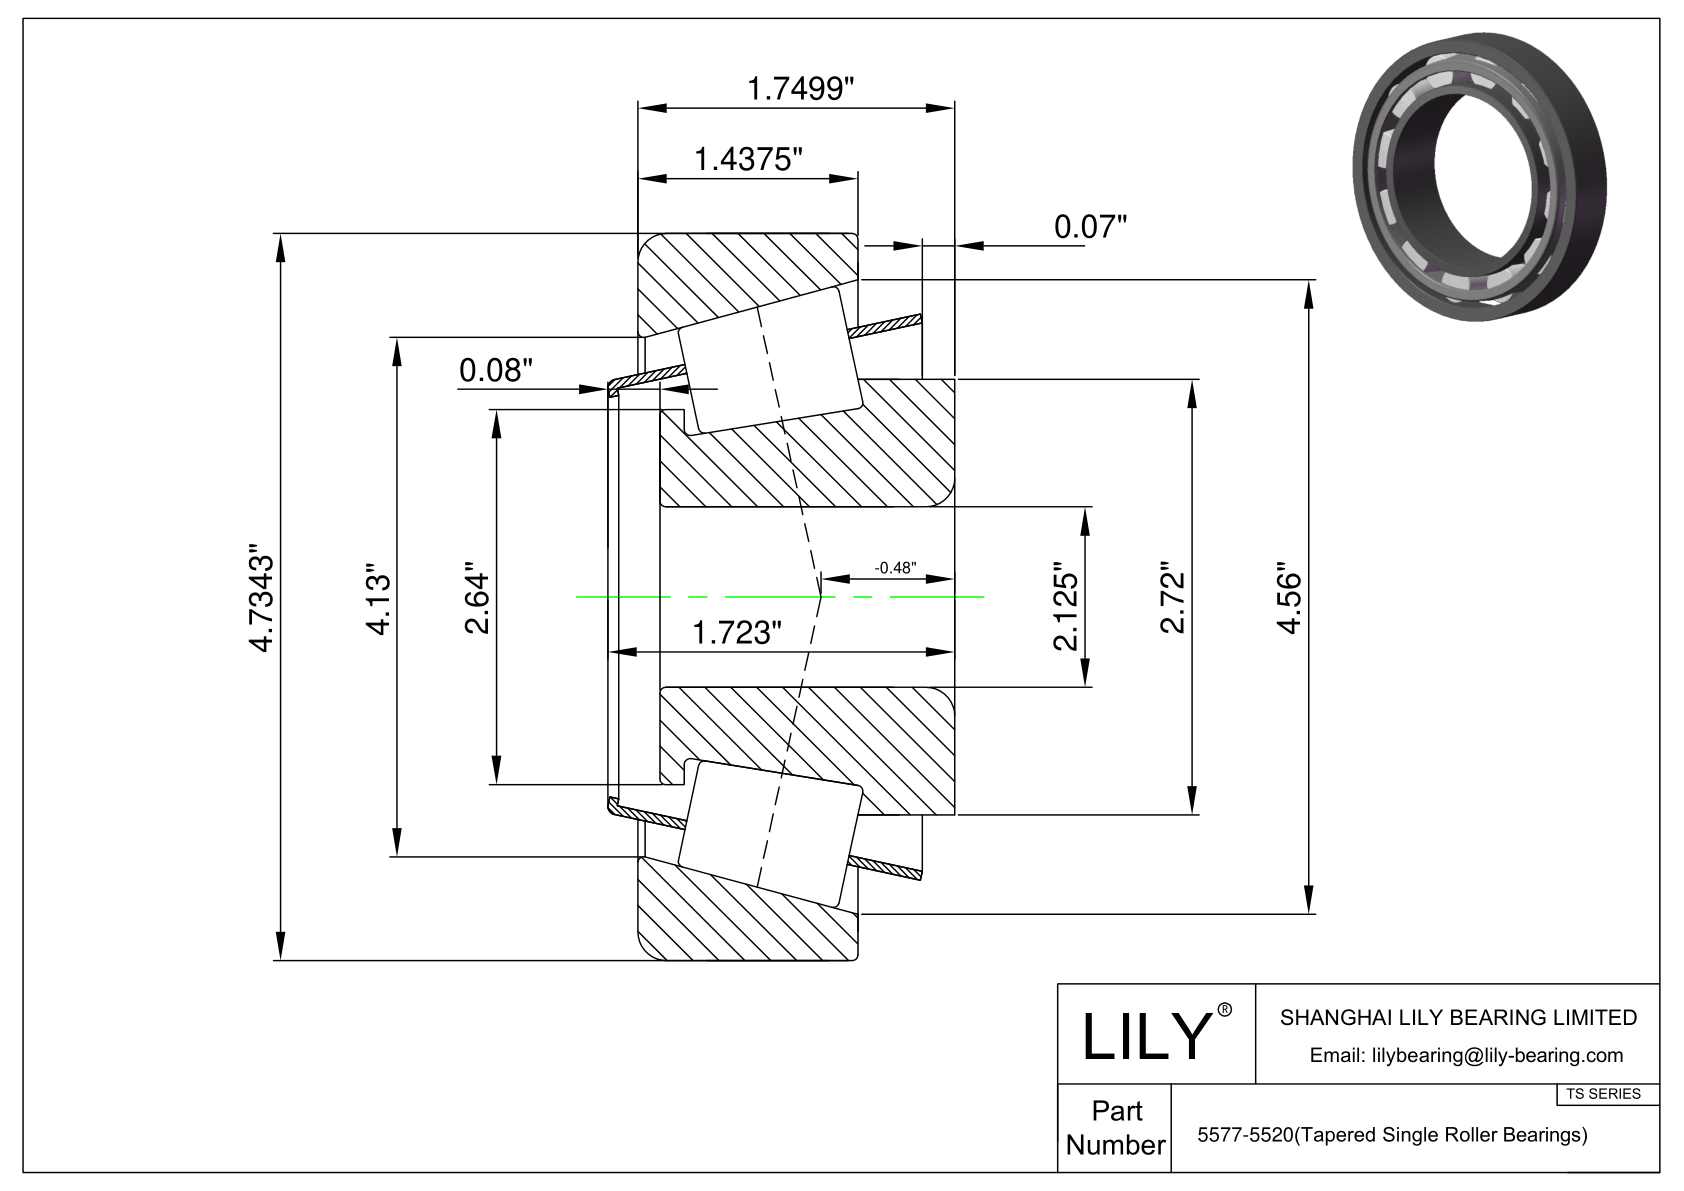 5577-5520 TS (Tapered Single Roller Bearings) (Imperial) cad drawing